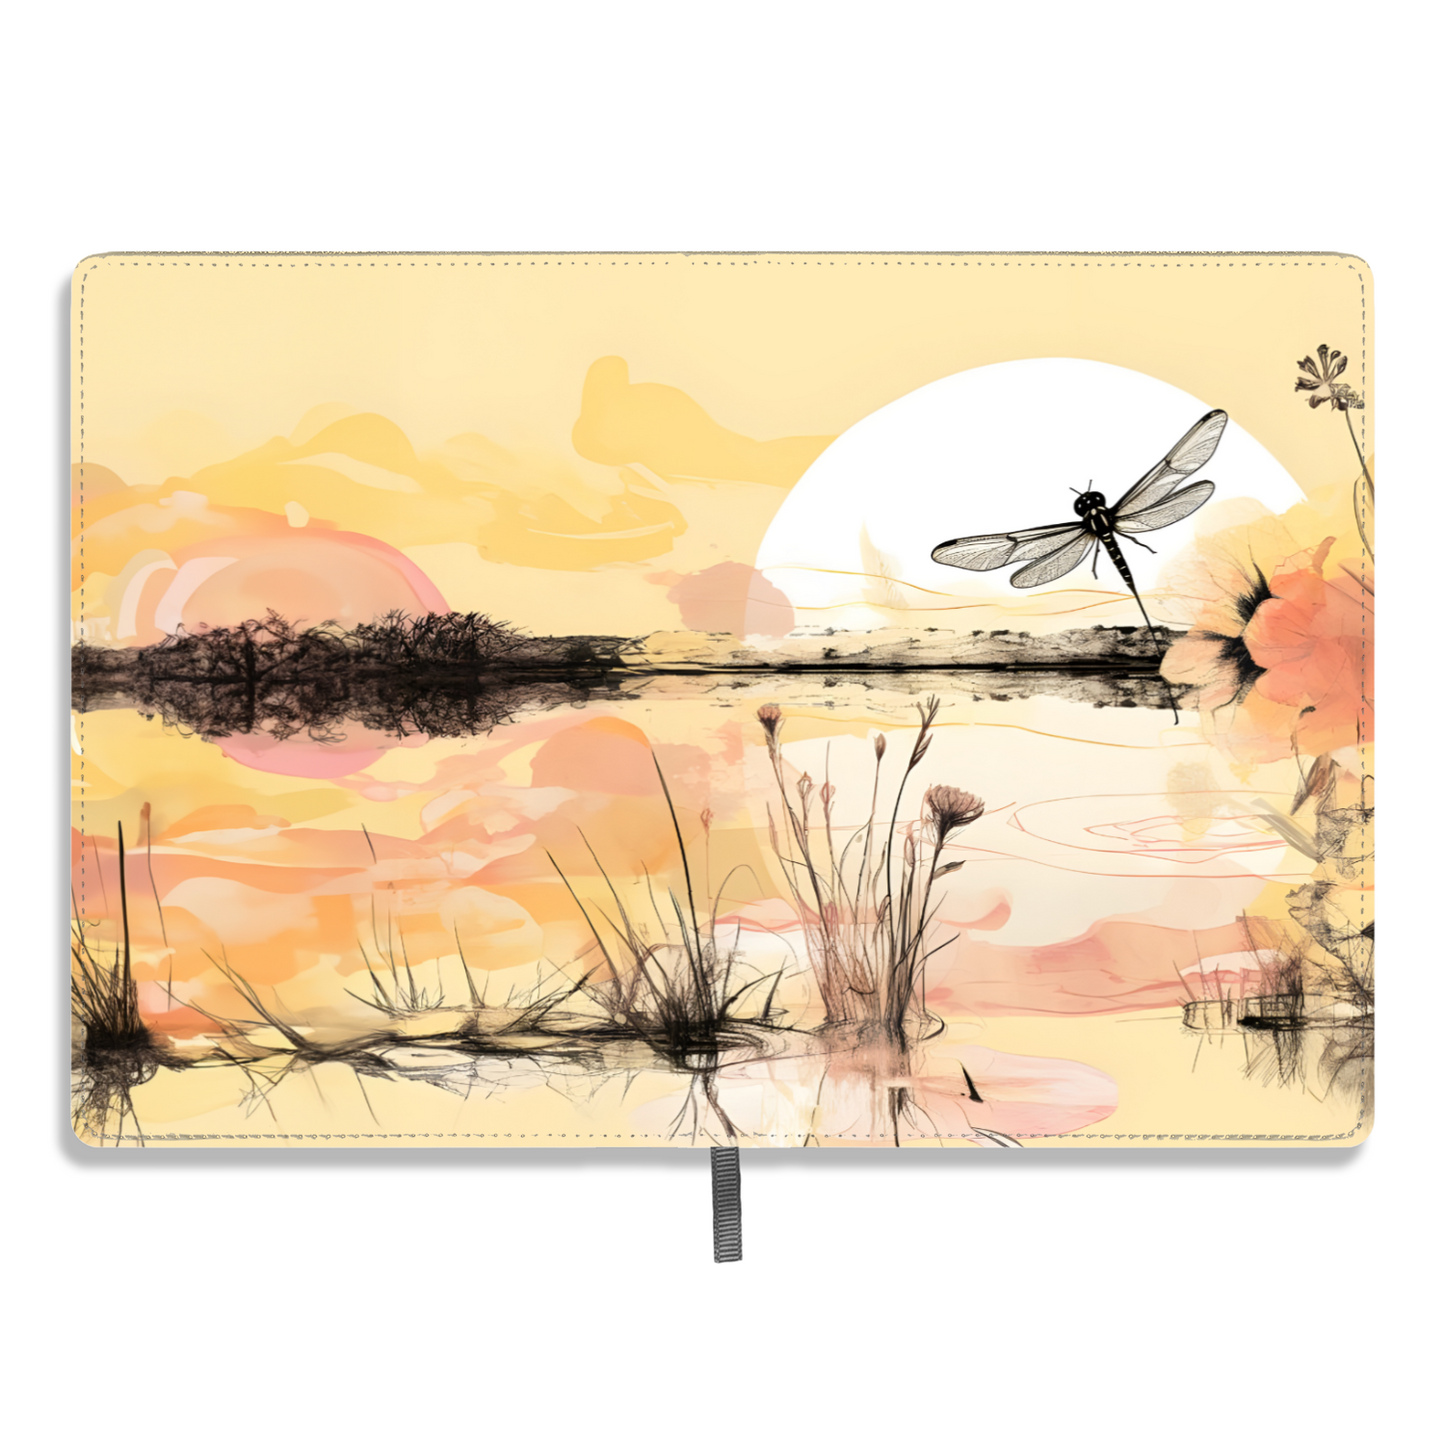 Dragonfly Reflections Allover Printed Lined Journal